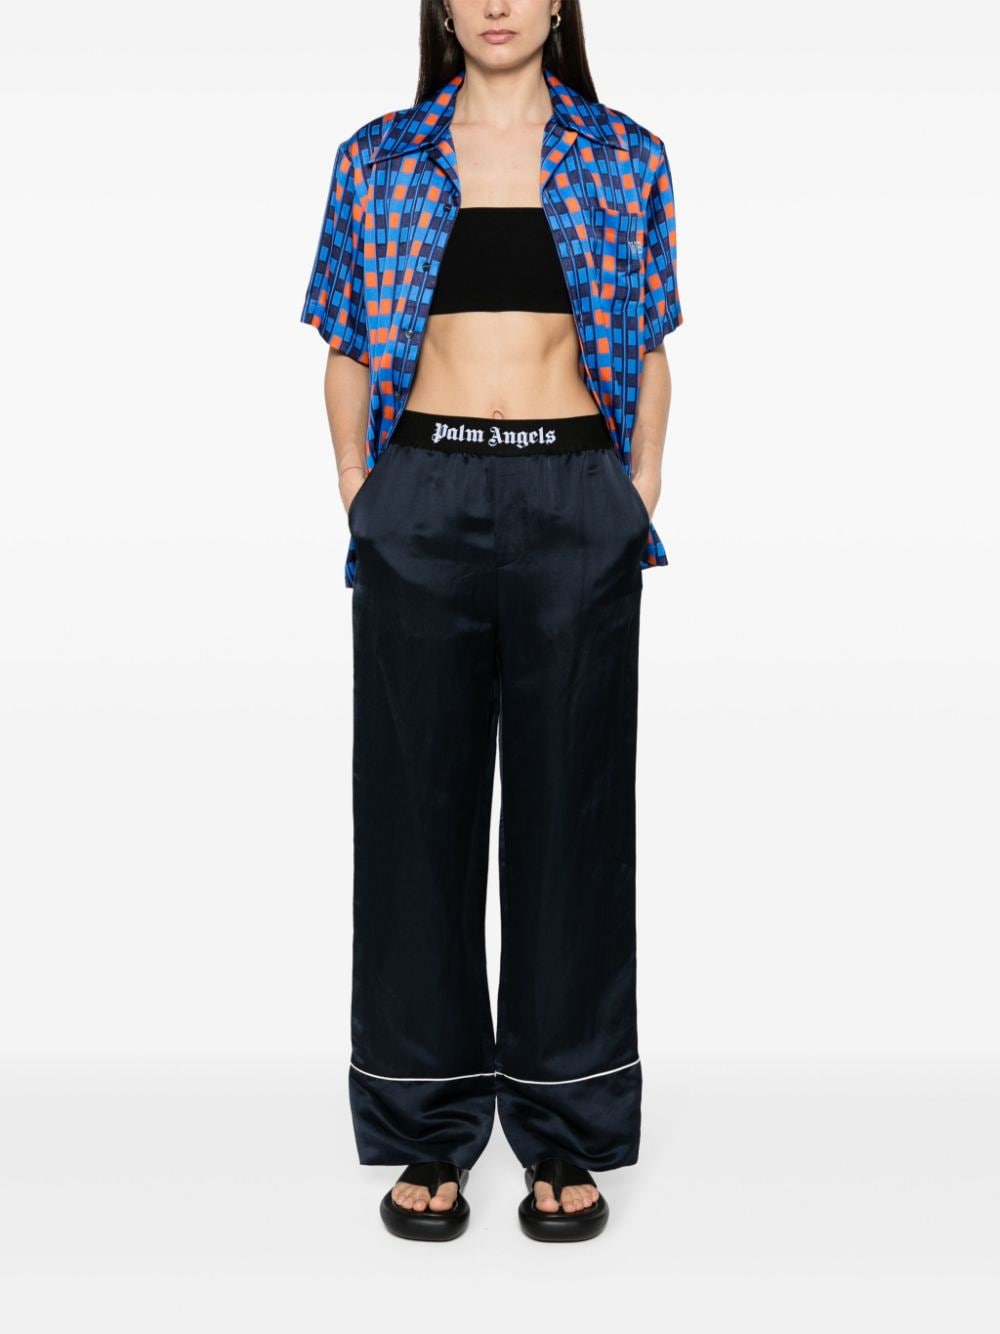 PALM ANGELS Navy Blue Satin Pants with White Band Logo for Women - SS24